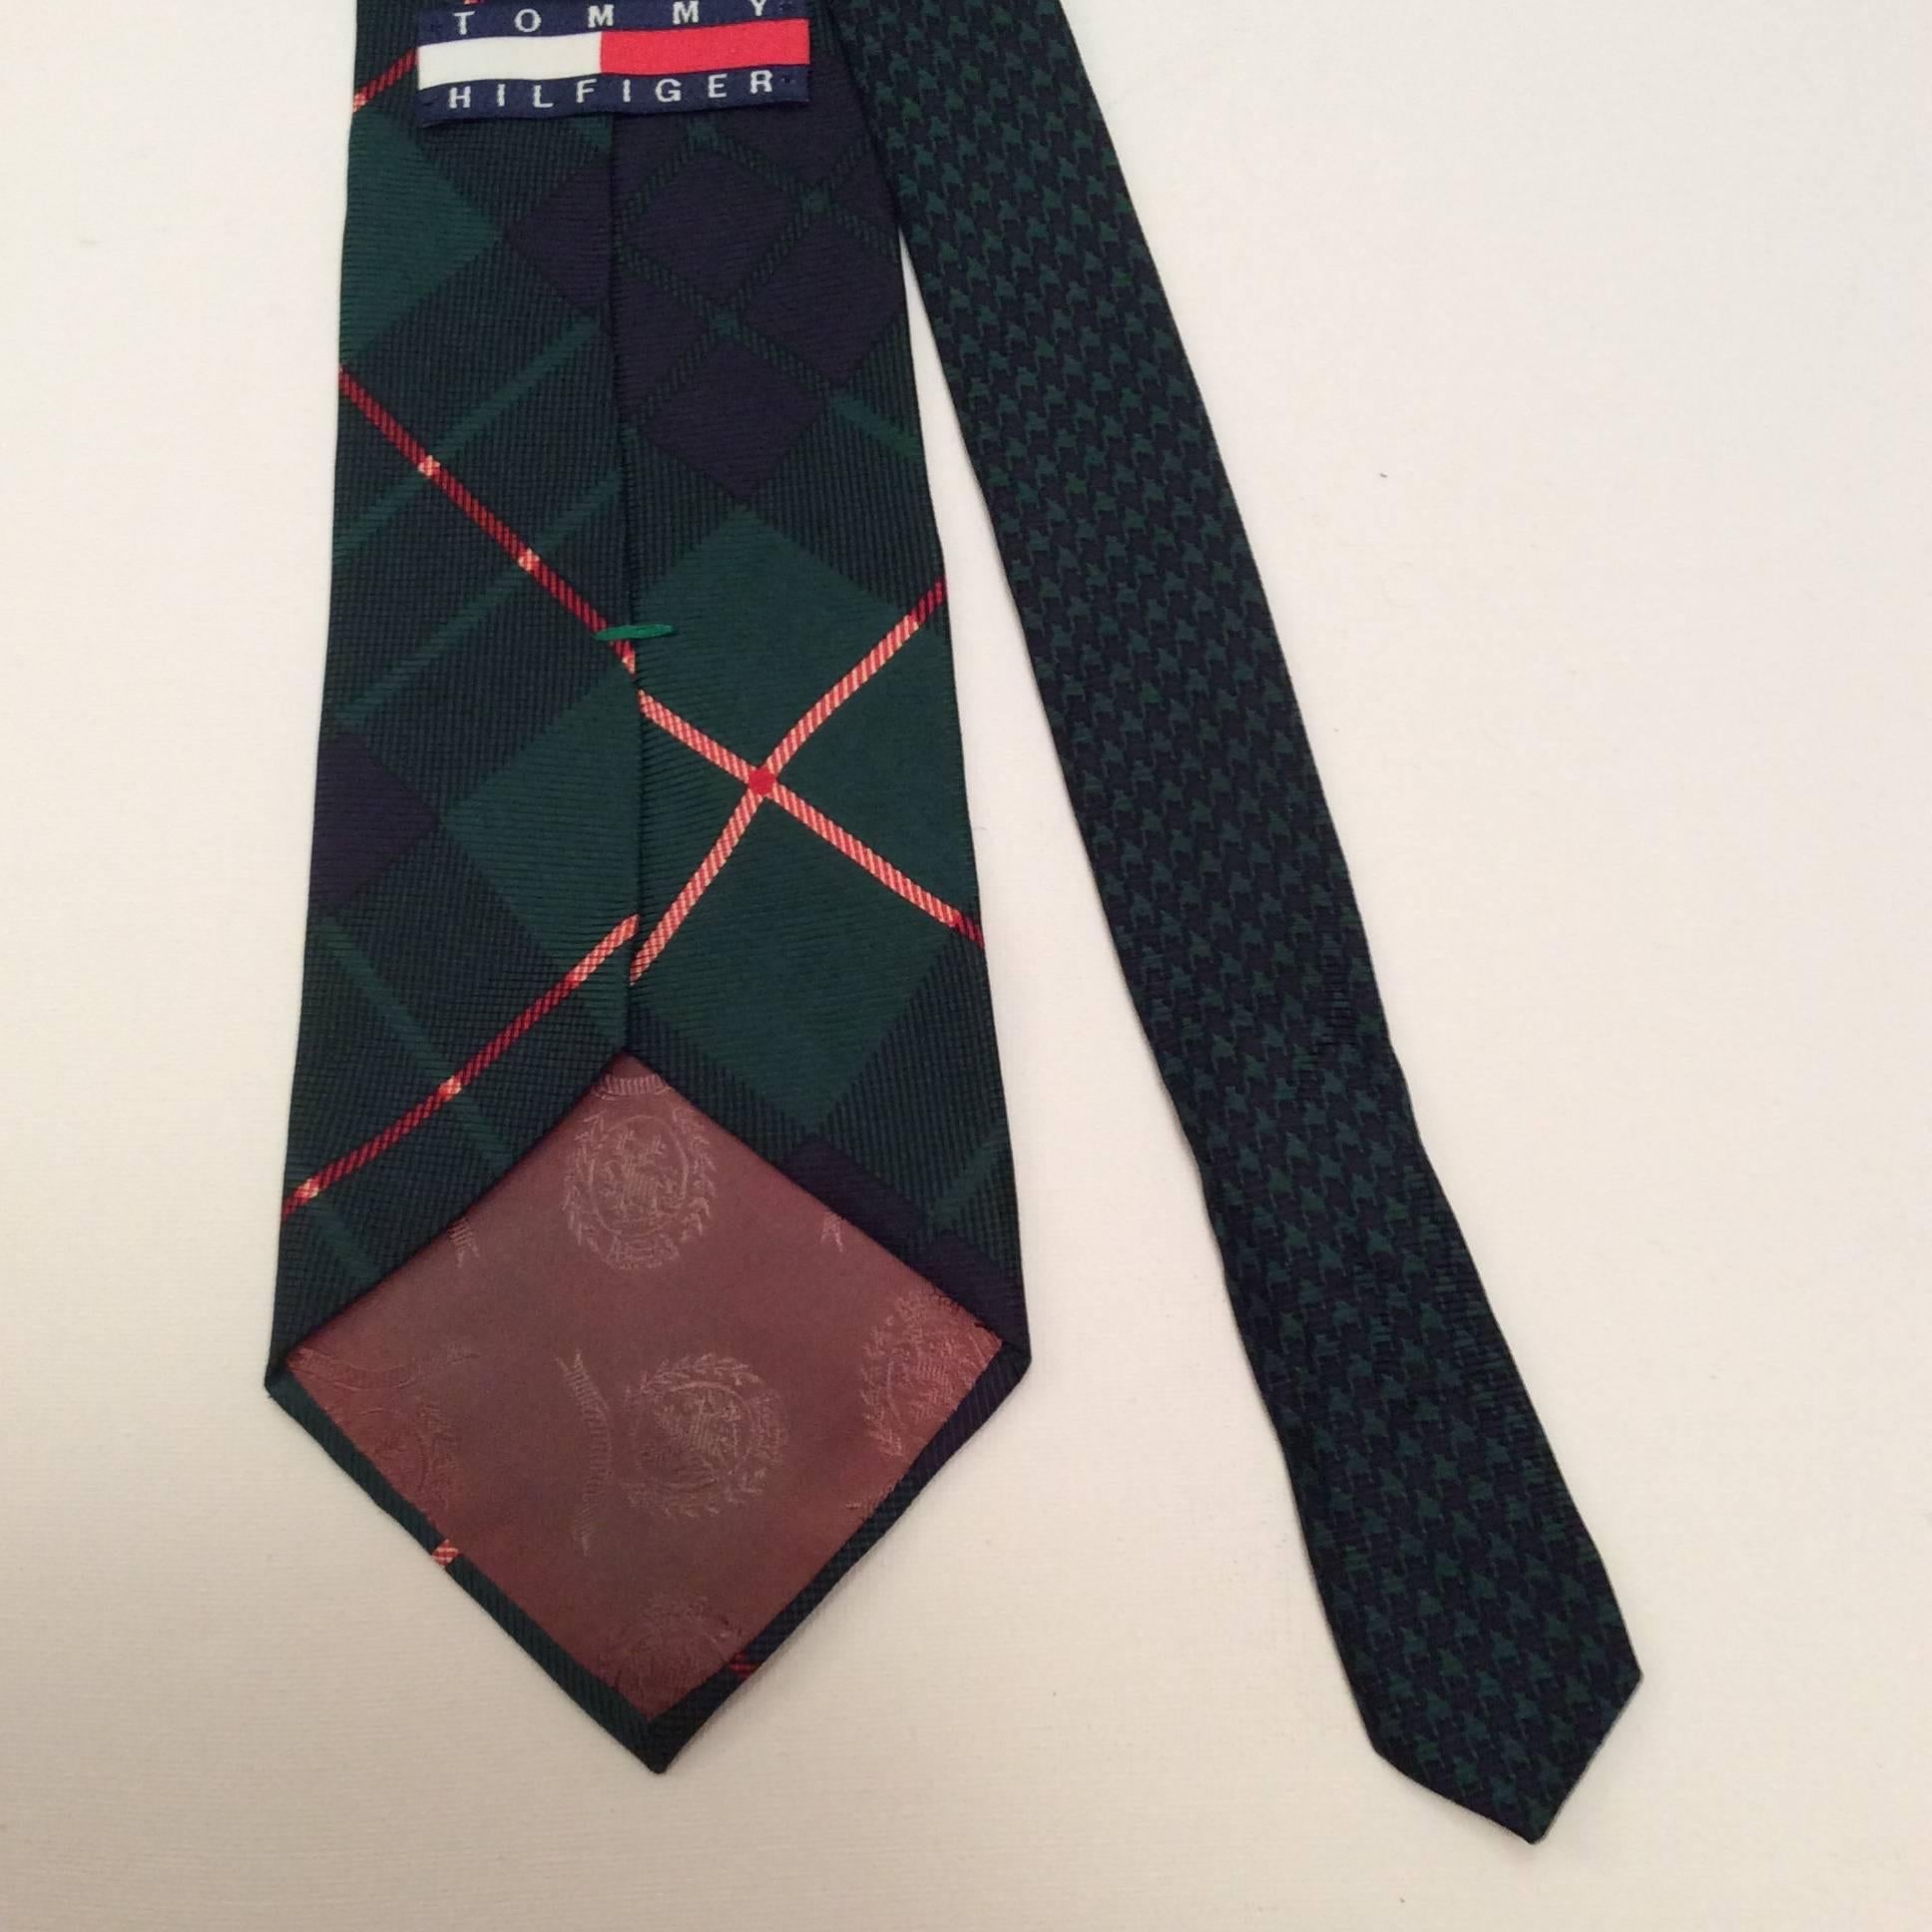 Tommy Hilfiger plaid silk necktie. The plaid is a green, blue, and red pattern. Gorgeous tie that is from the 1980's and in mint condition. A great addition to any personal clothing collection. 